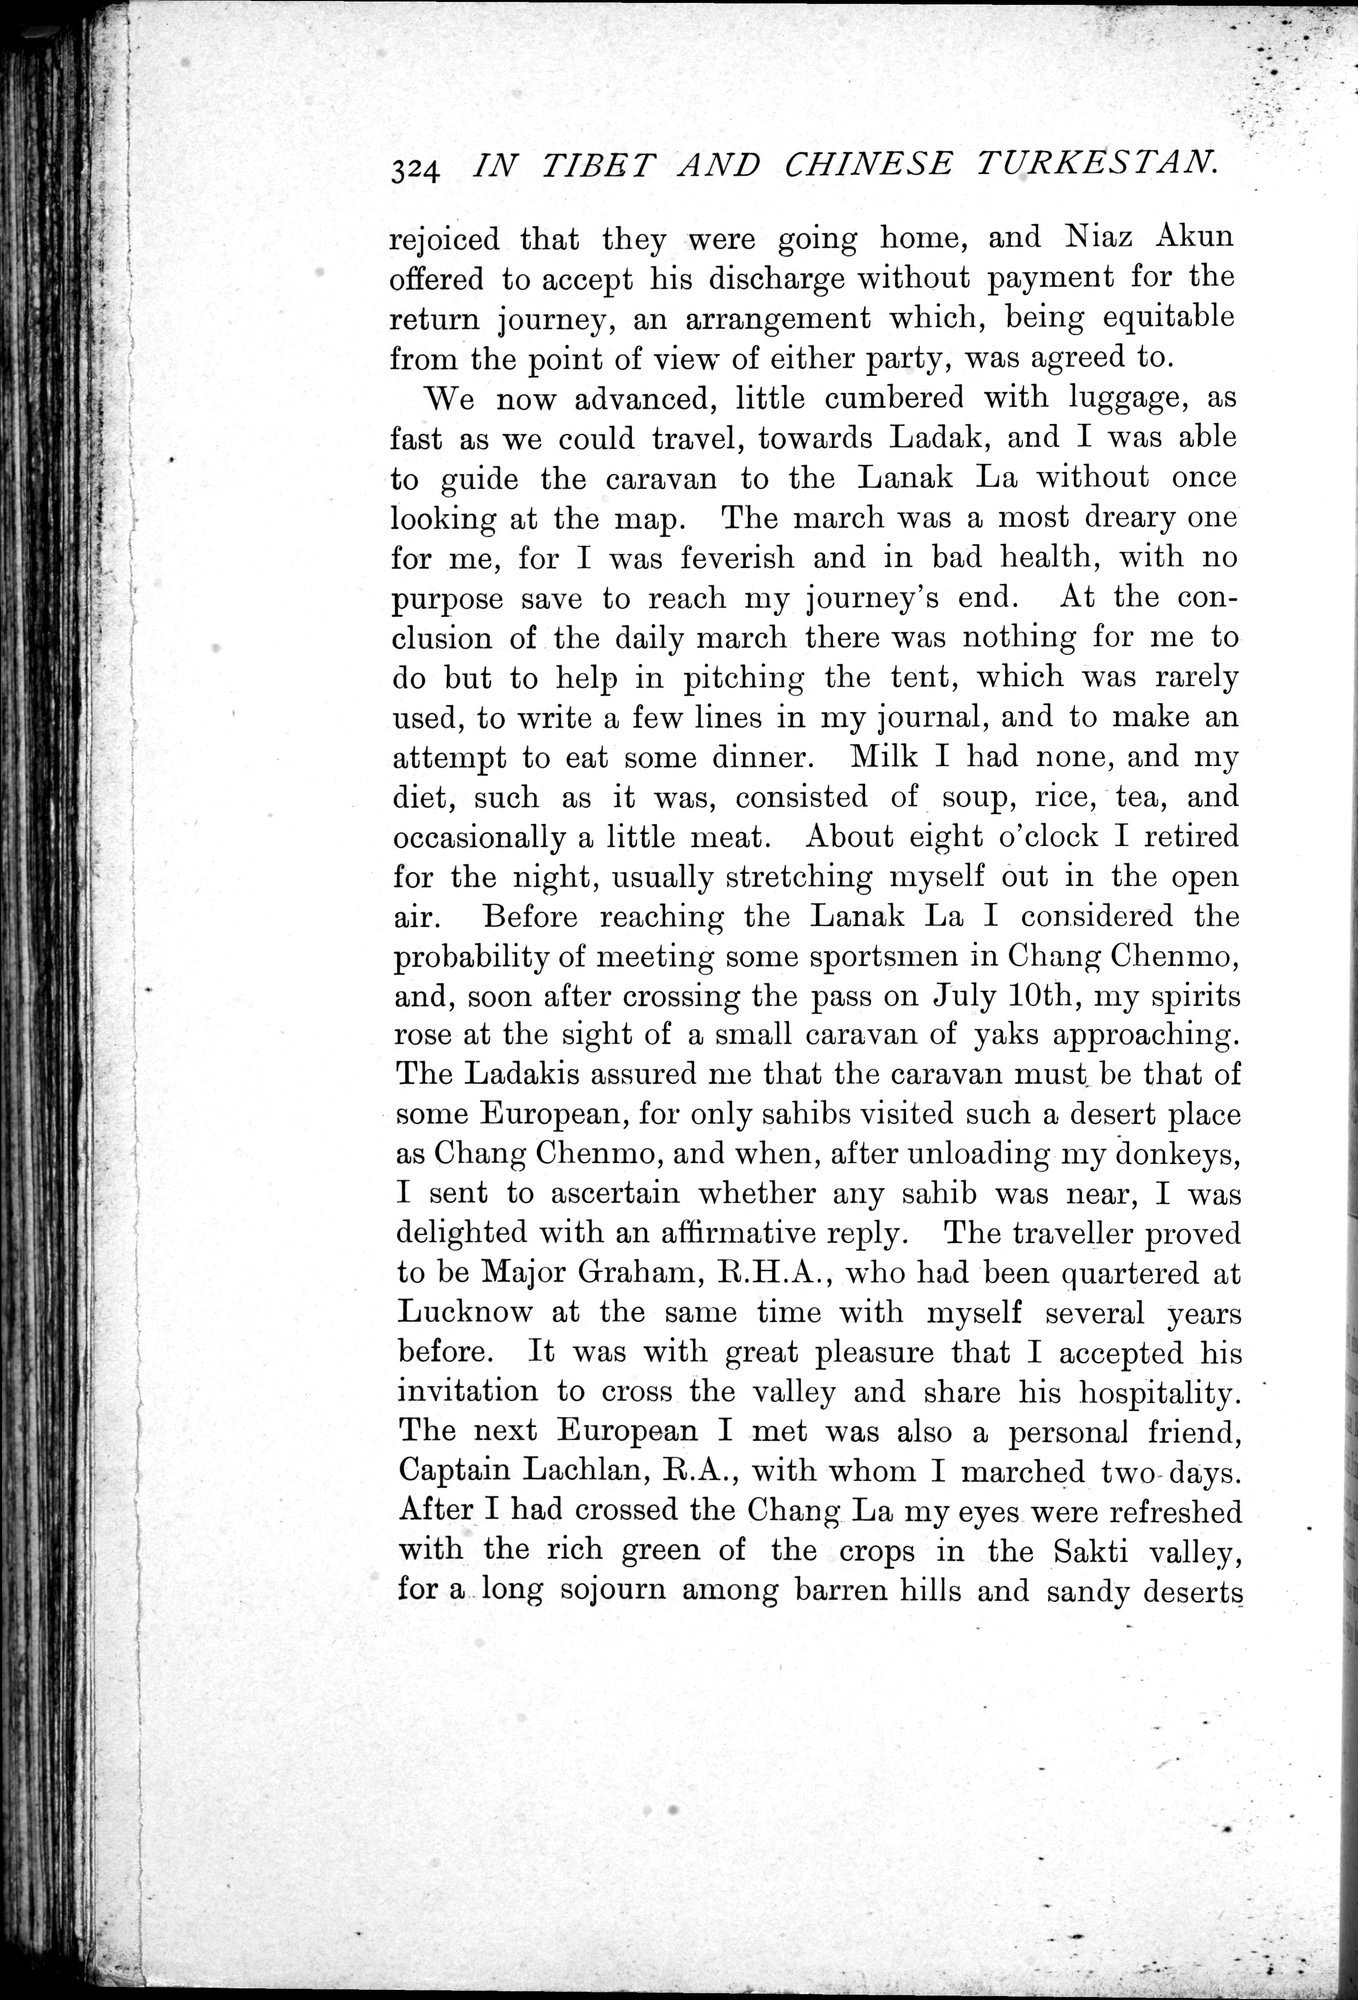 In Tibet and Chinese Turkestan : vol.1 / Page 364 (Grayscale High Resolution Image)